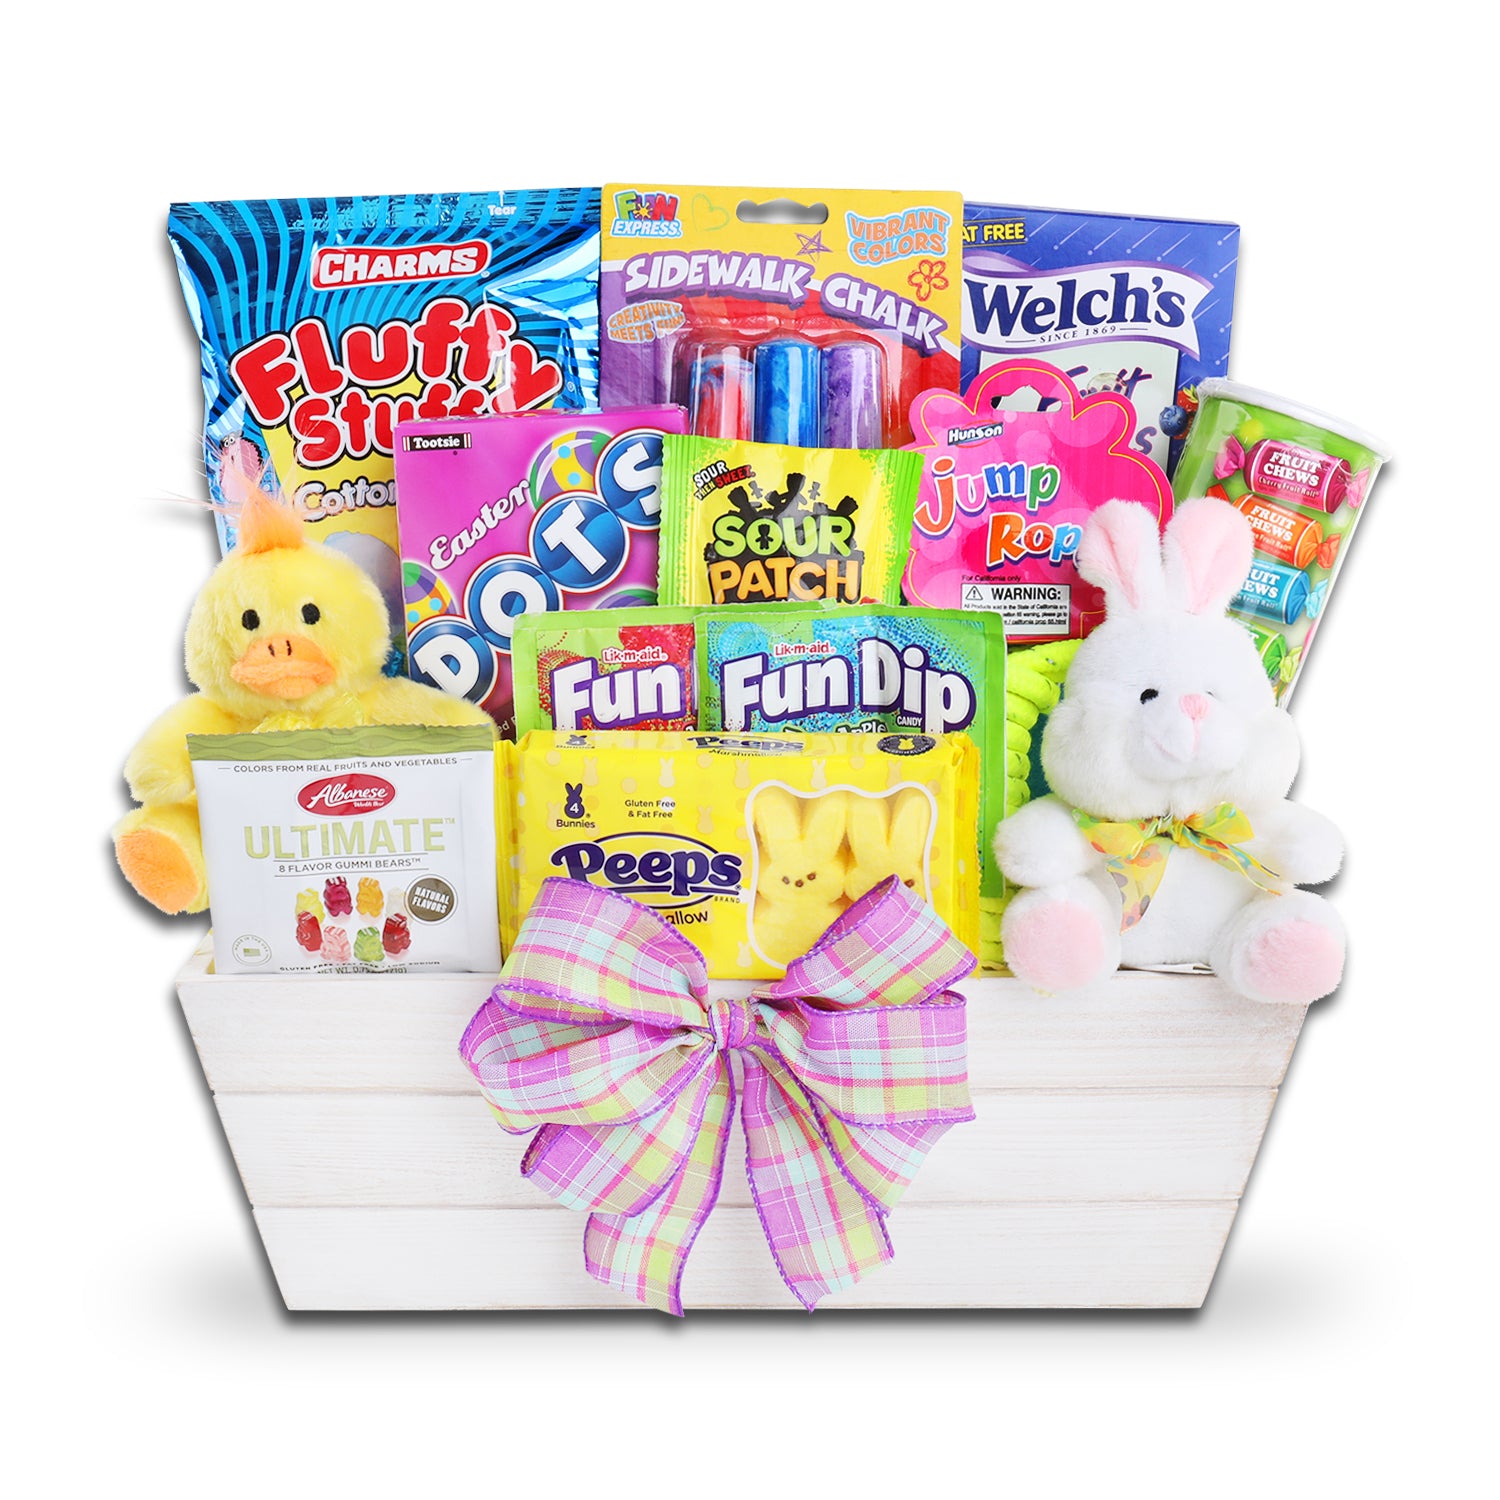 Welch’s Fruit Snacks (2.25oz.), Charms Fluffy Stuff Cotton Cady (2.5oz.), Dots Springtime Candy Box (6oz.), Tootsie Fruit Chew Bank (4oz.), Yellow Bunny Peeps (4ct.), 2 Fun Dip (0.43oz.), Albanese Ultimate 8 Flavor Gummi Bears (0.75oz.), Sour Patch Kids Fun Size (0.5oz.), 2 Reese’s Peanut Butter Egg (0.6oz.), Sidewalk Chalk (3ct.), Jump rope, Plush Duck (4.5 inches), Plush Bunny (4.5 inches), Reusable Wooden Crate